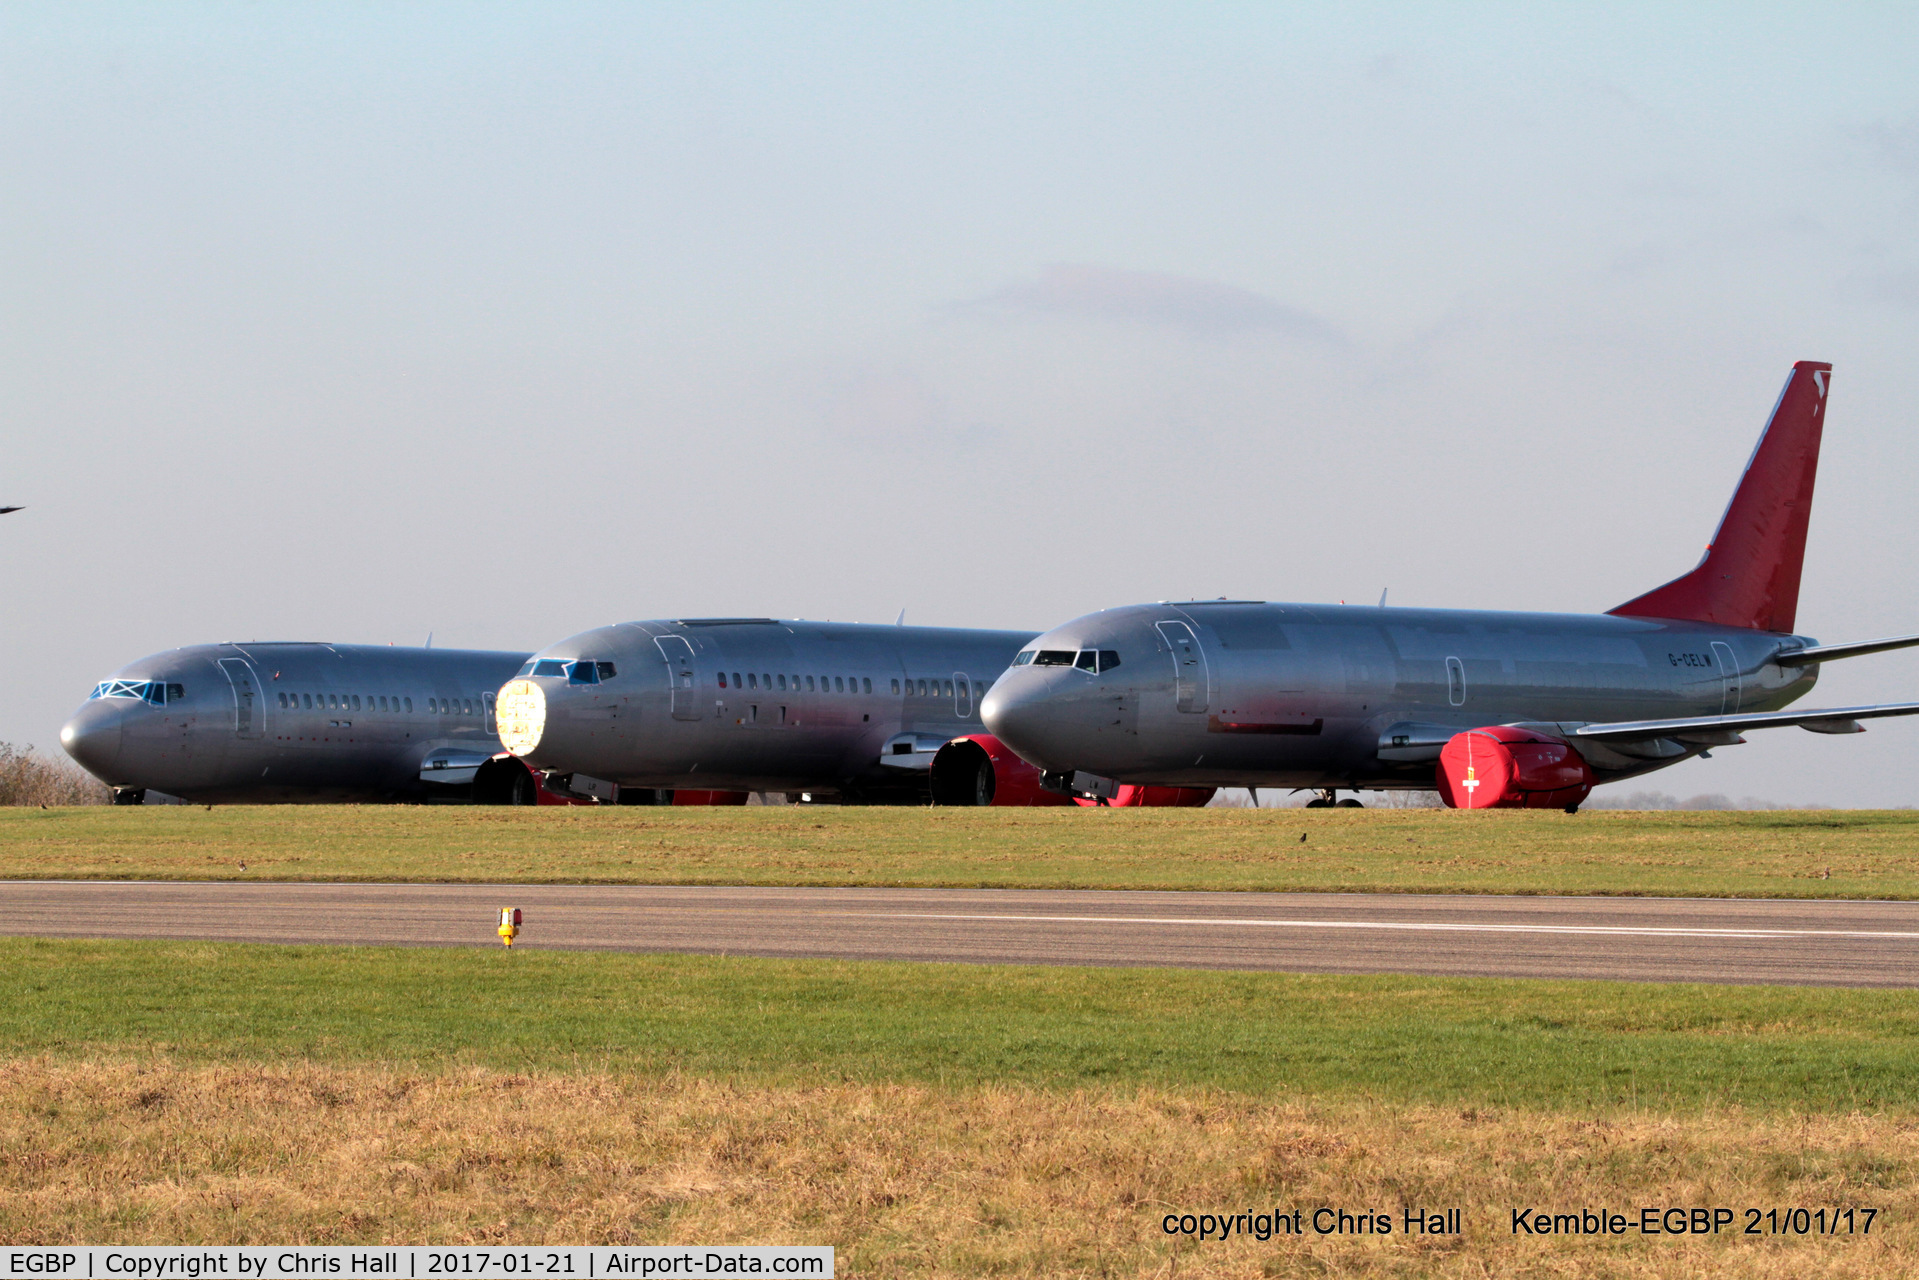 Kemble Airport, Kemble, England United Kingdom (EGBP) - ex Jet2 B737's in the scrapping area at Kemble